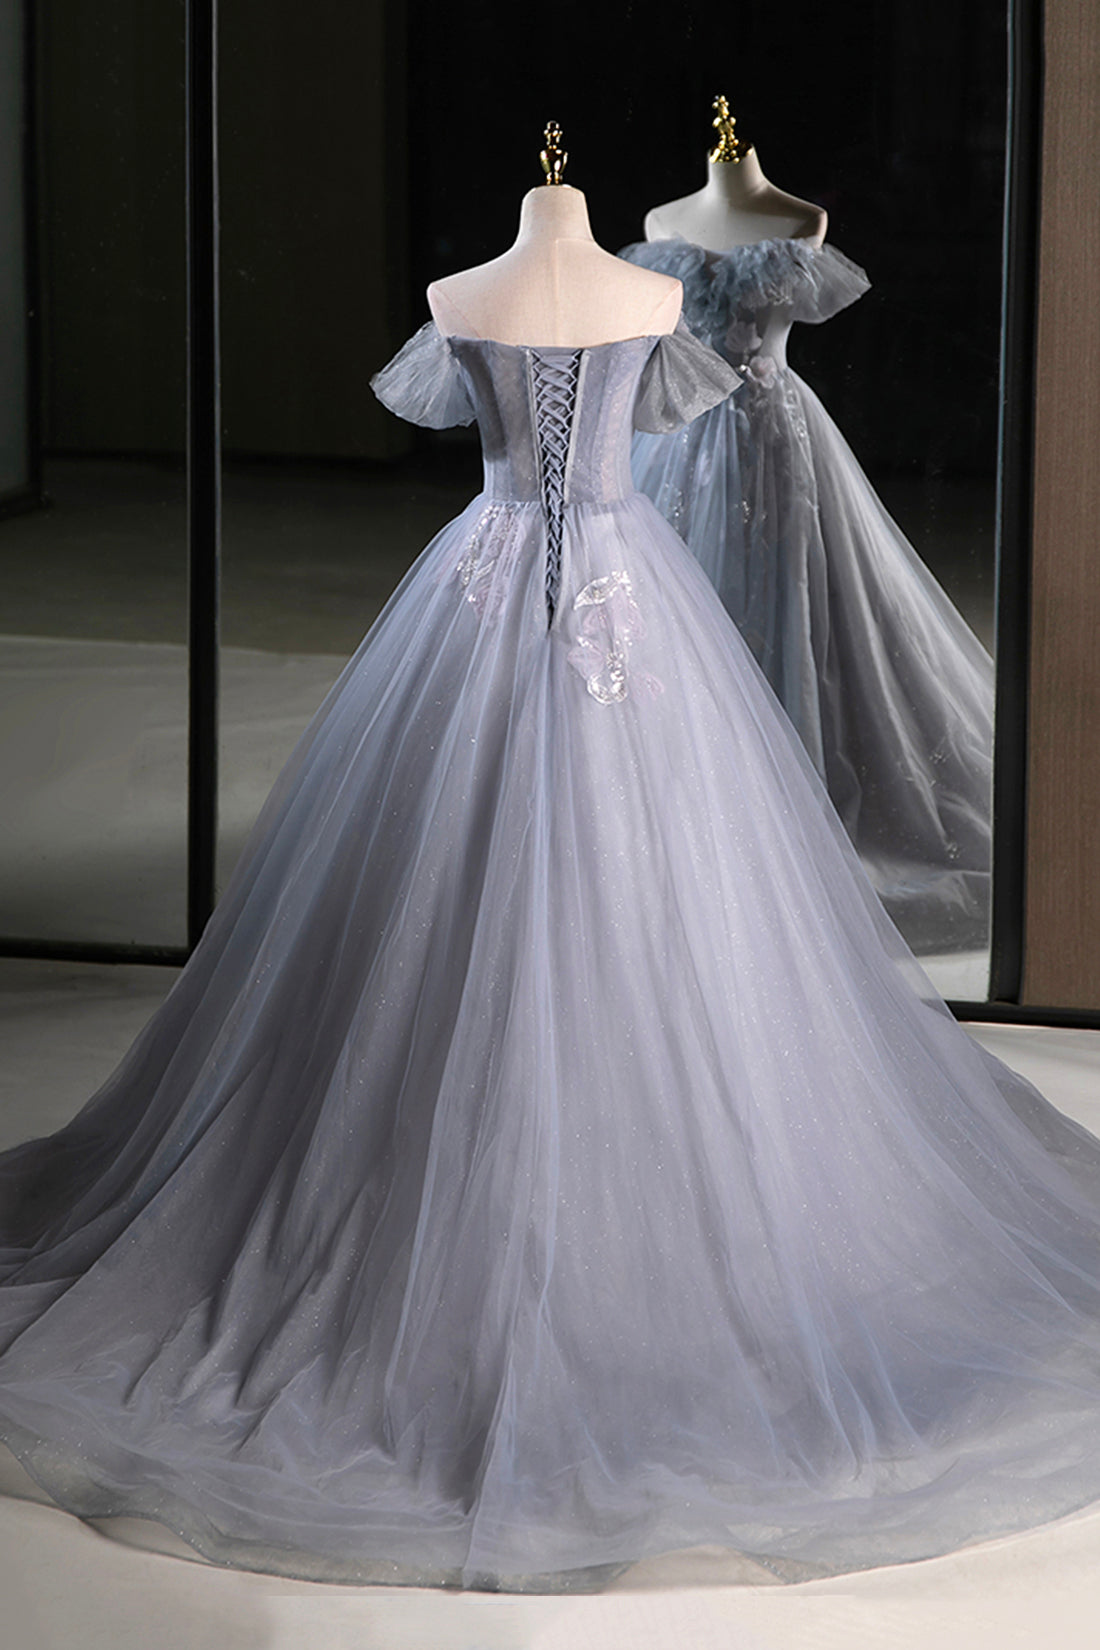 Gray Tulle Floor Length Prom Dress, Beautiful A-Line Off the Shoulder Evening Party Dress